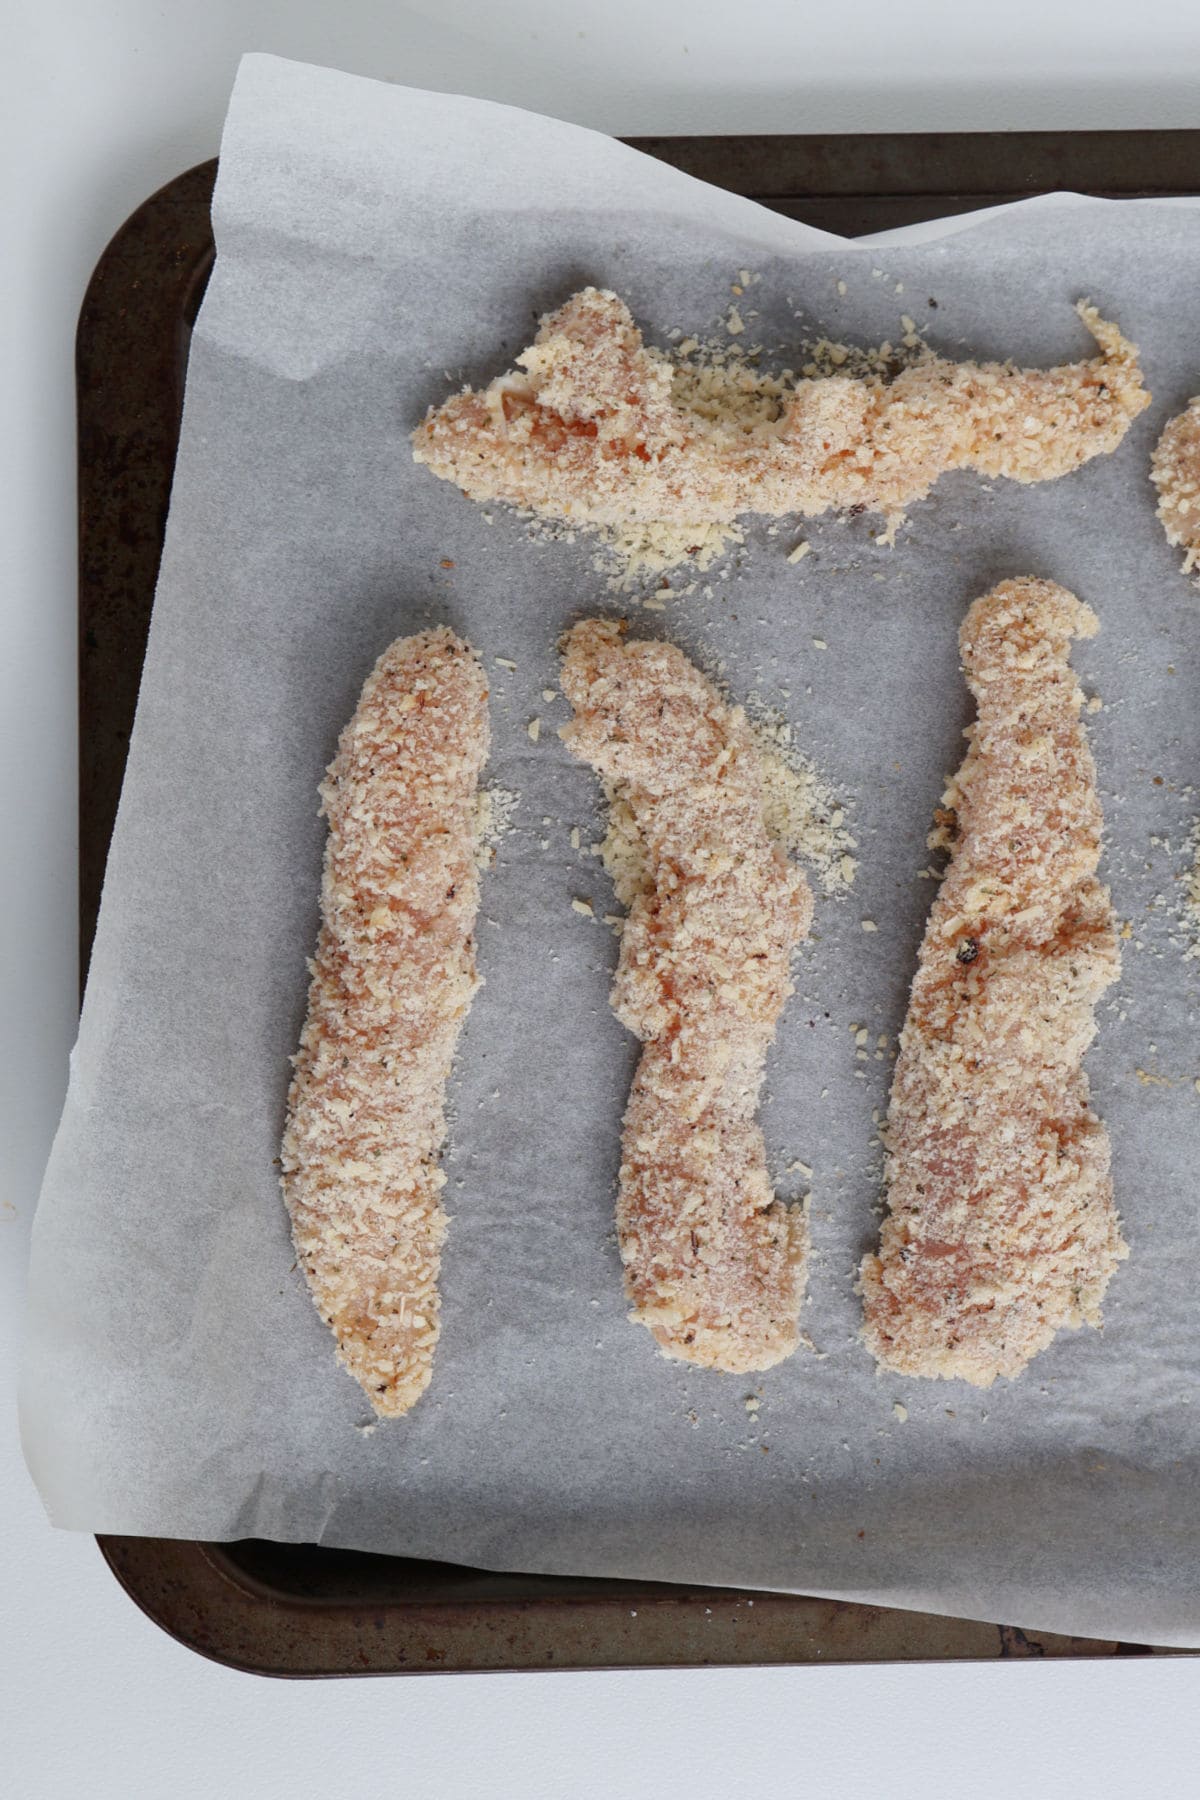 Uncooked chicken tenders on a baking tray.